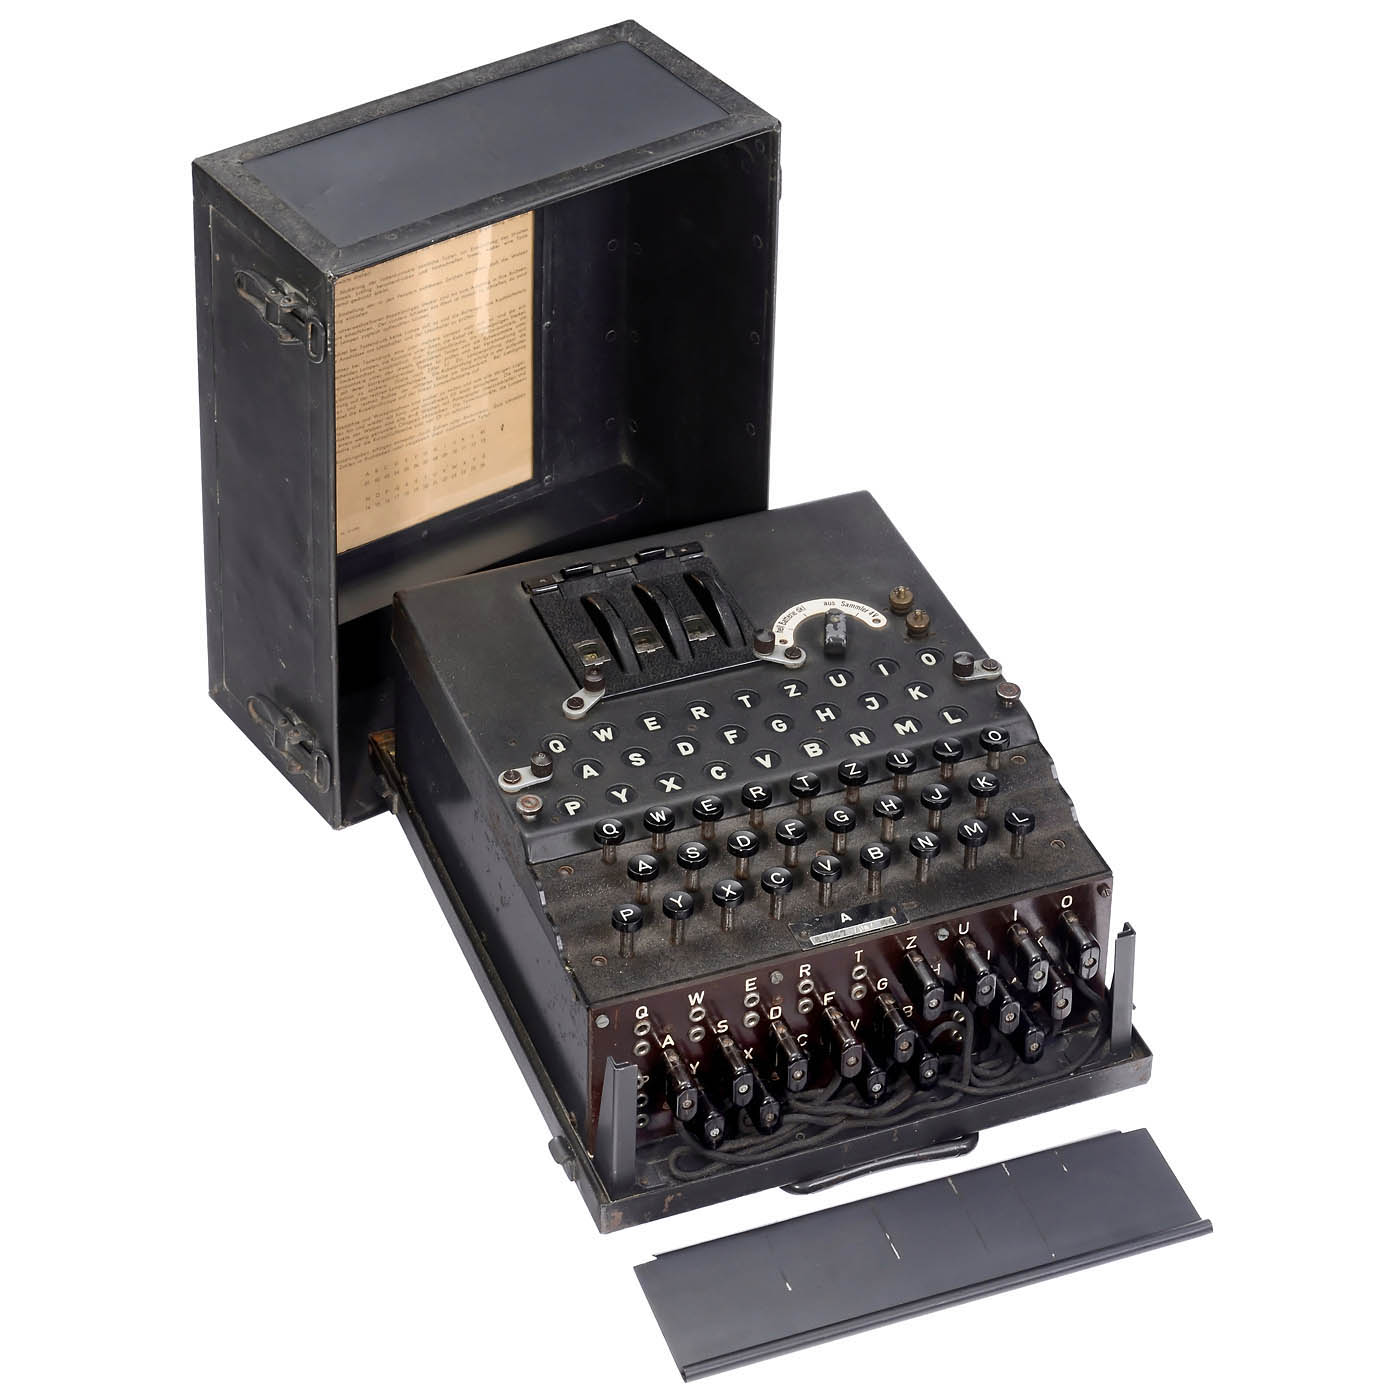 Legendary German "Enigma 1" Cyphering Machine with Special Switching, 1944 - Image 2 of 10